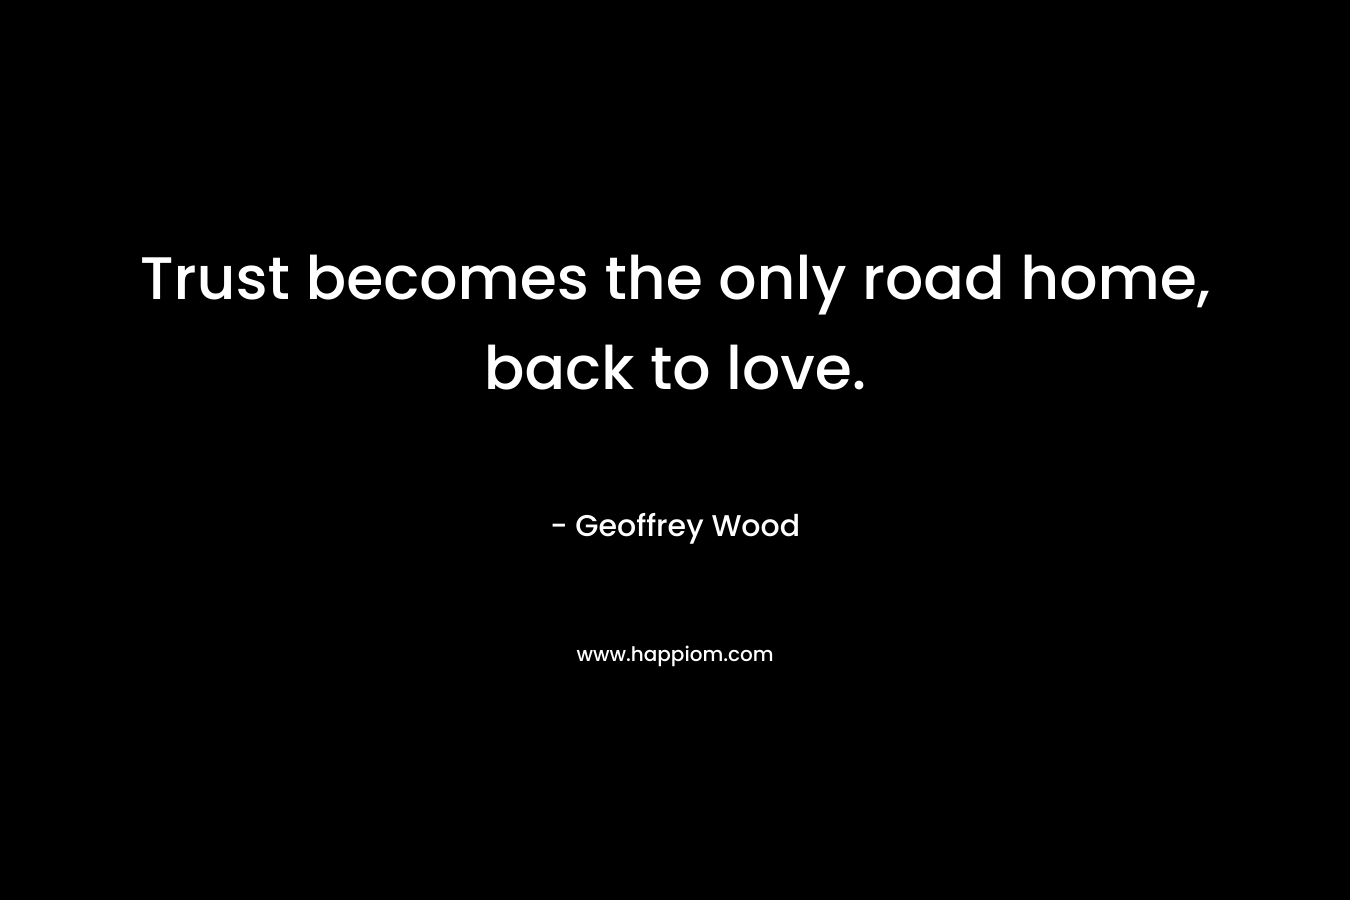 Trust becomes the only road home, back to love. – Geoffrey Wood